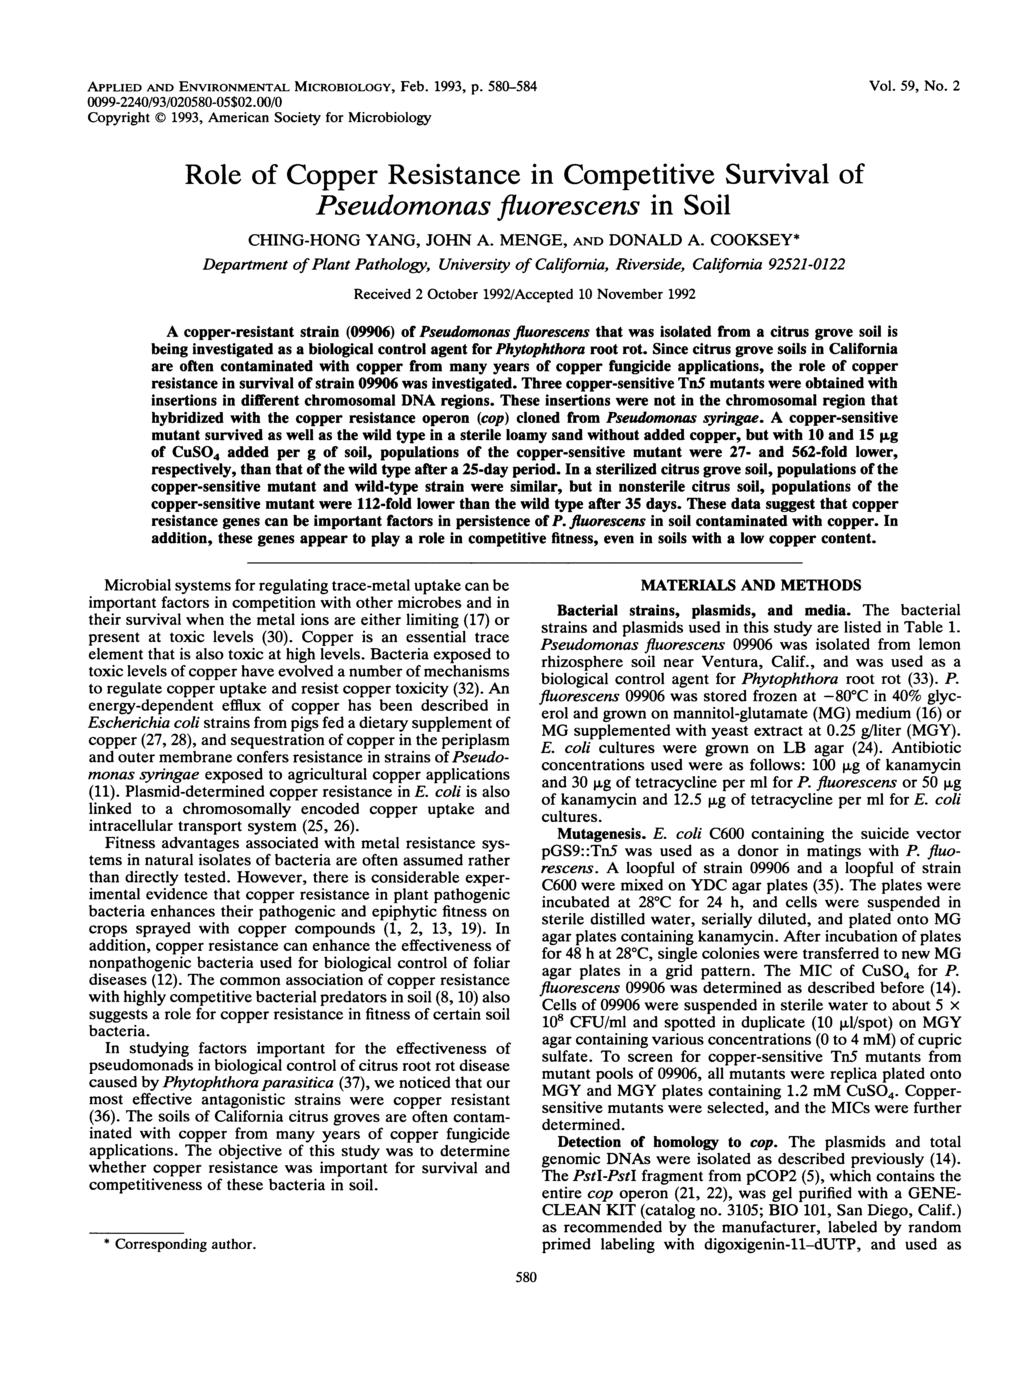 APPLIED AND ENVIRONMENTAL MICROBIOLOGY, Feb. 1993, p. 580-584 0099-2240/93/020580-05$02.00/0 Copyright D 1993, American Society for Microbiology Vol. 59, No.